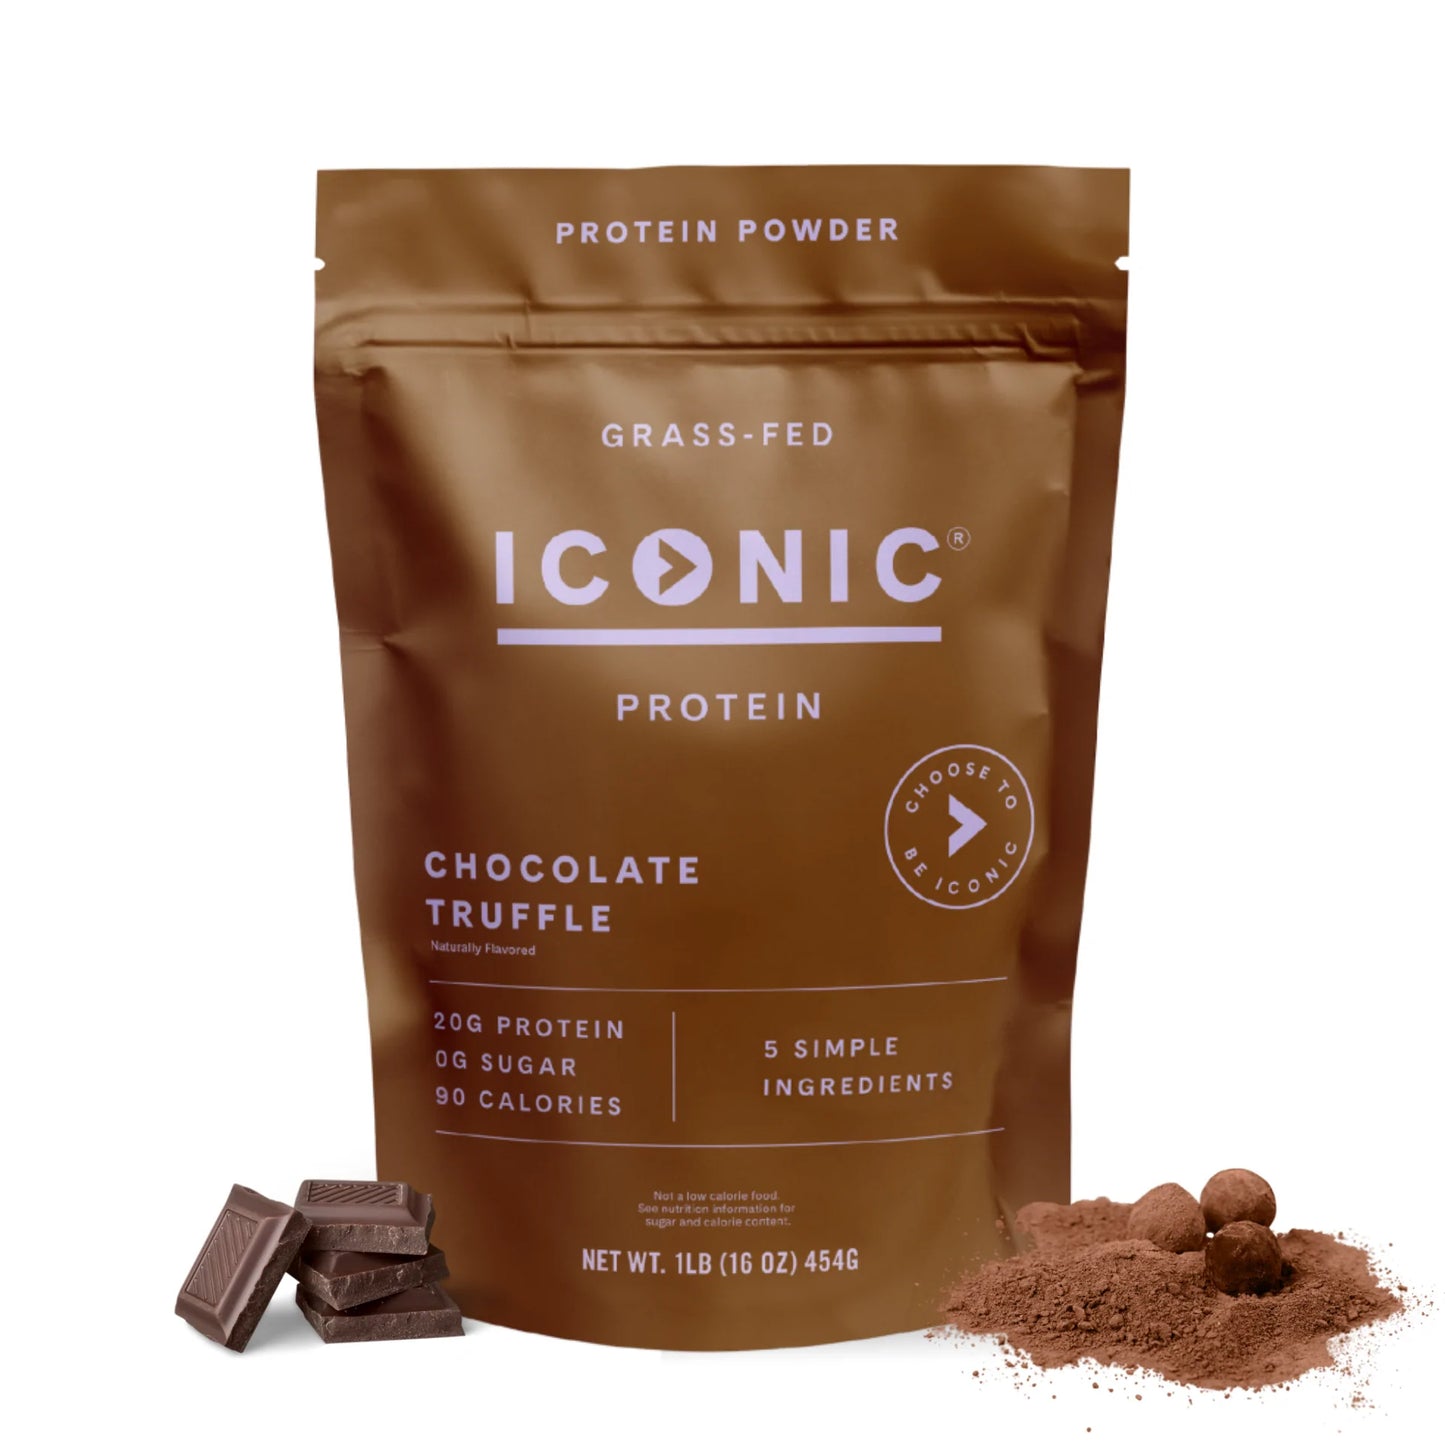 ICONIC sugarfree chocolate truffle protein powder in a brown bag on a white background